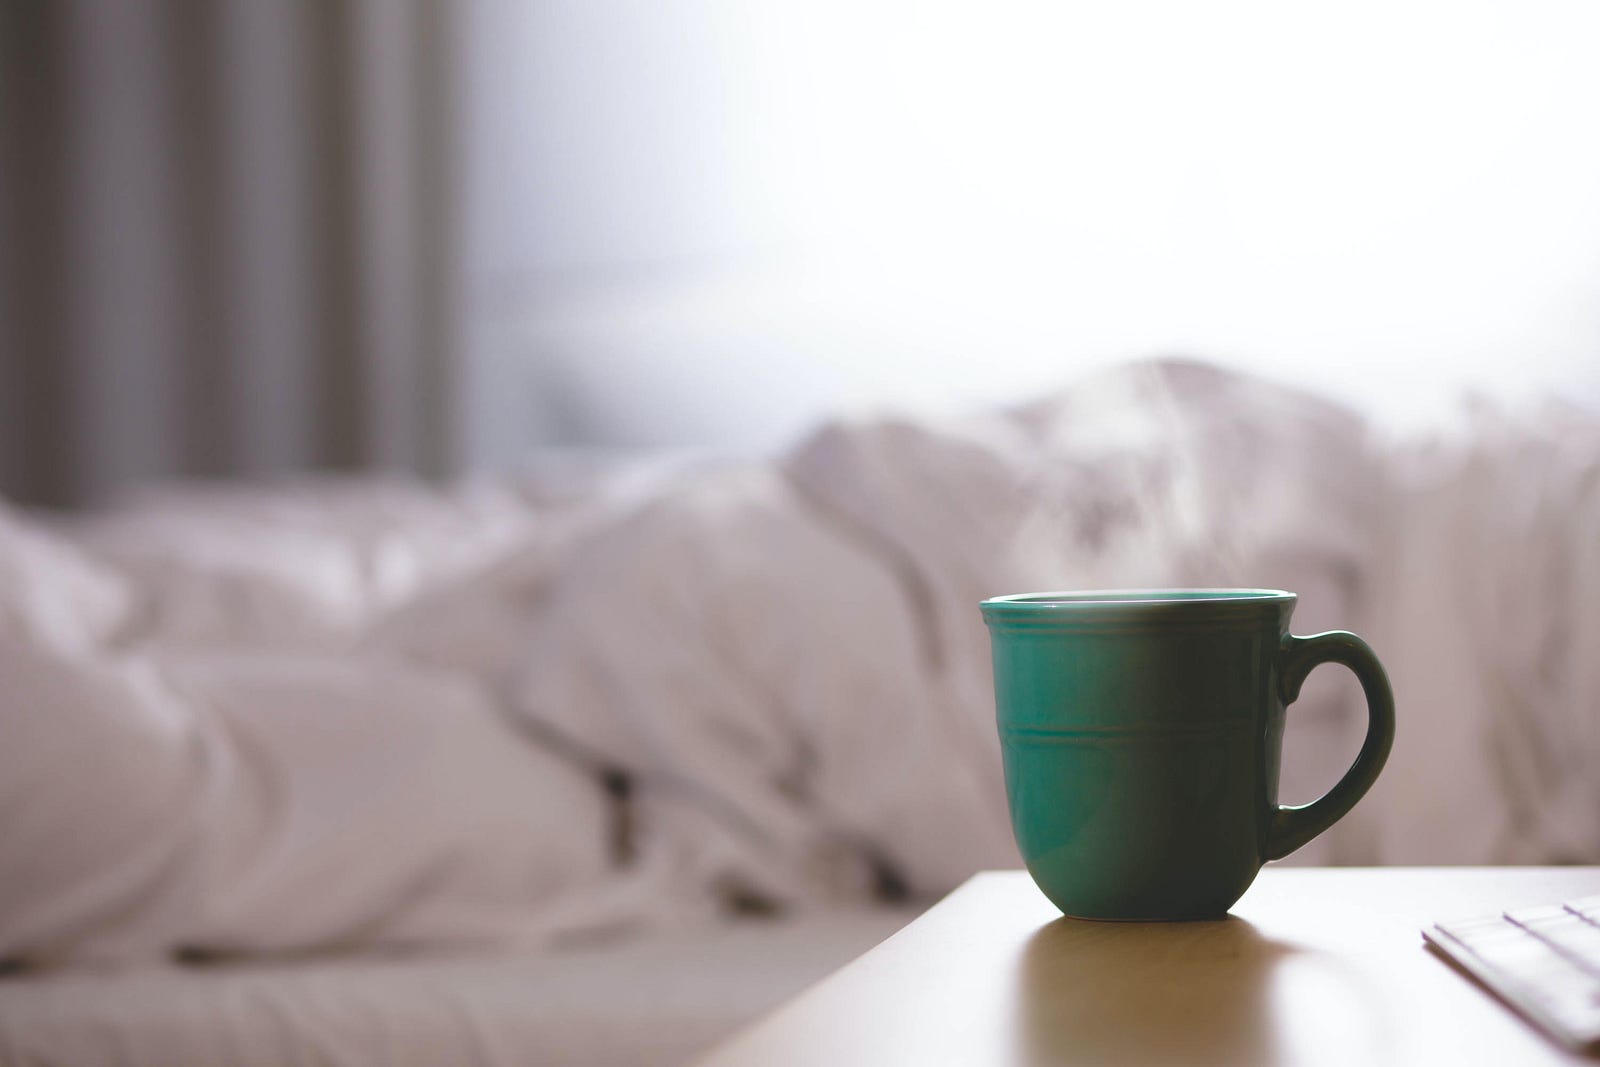 A green cup (with steam rising out of it) sits on a desk in the foreground. There are messy sheets on a bed in the background. U.S. hospitalization rates from RSV and flu are rising, and outpatient visits for respiratory illnesses are abnormally high, according to CDC data.